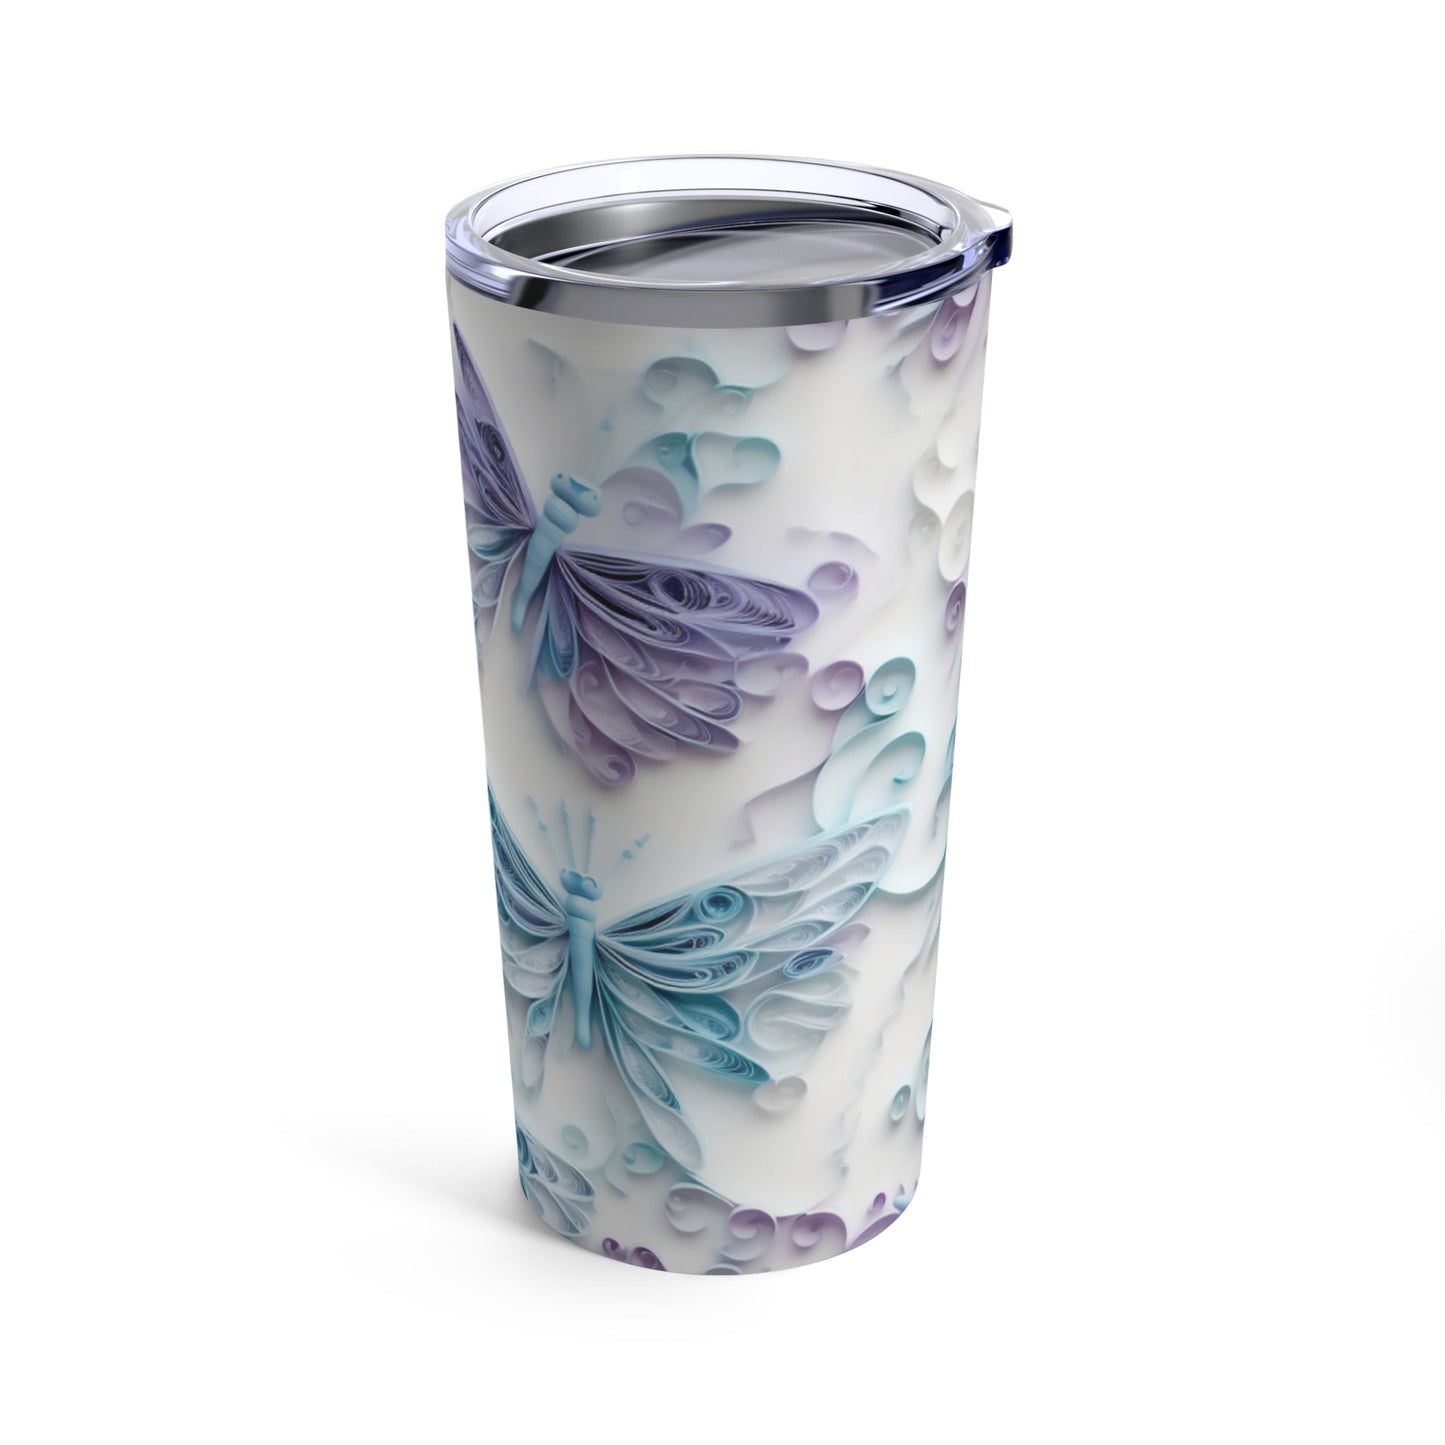 Exquisite Paper Quilled Butterflies - 20oz Tumbler - Great Gift for Her